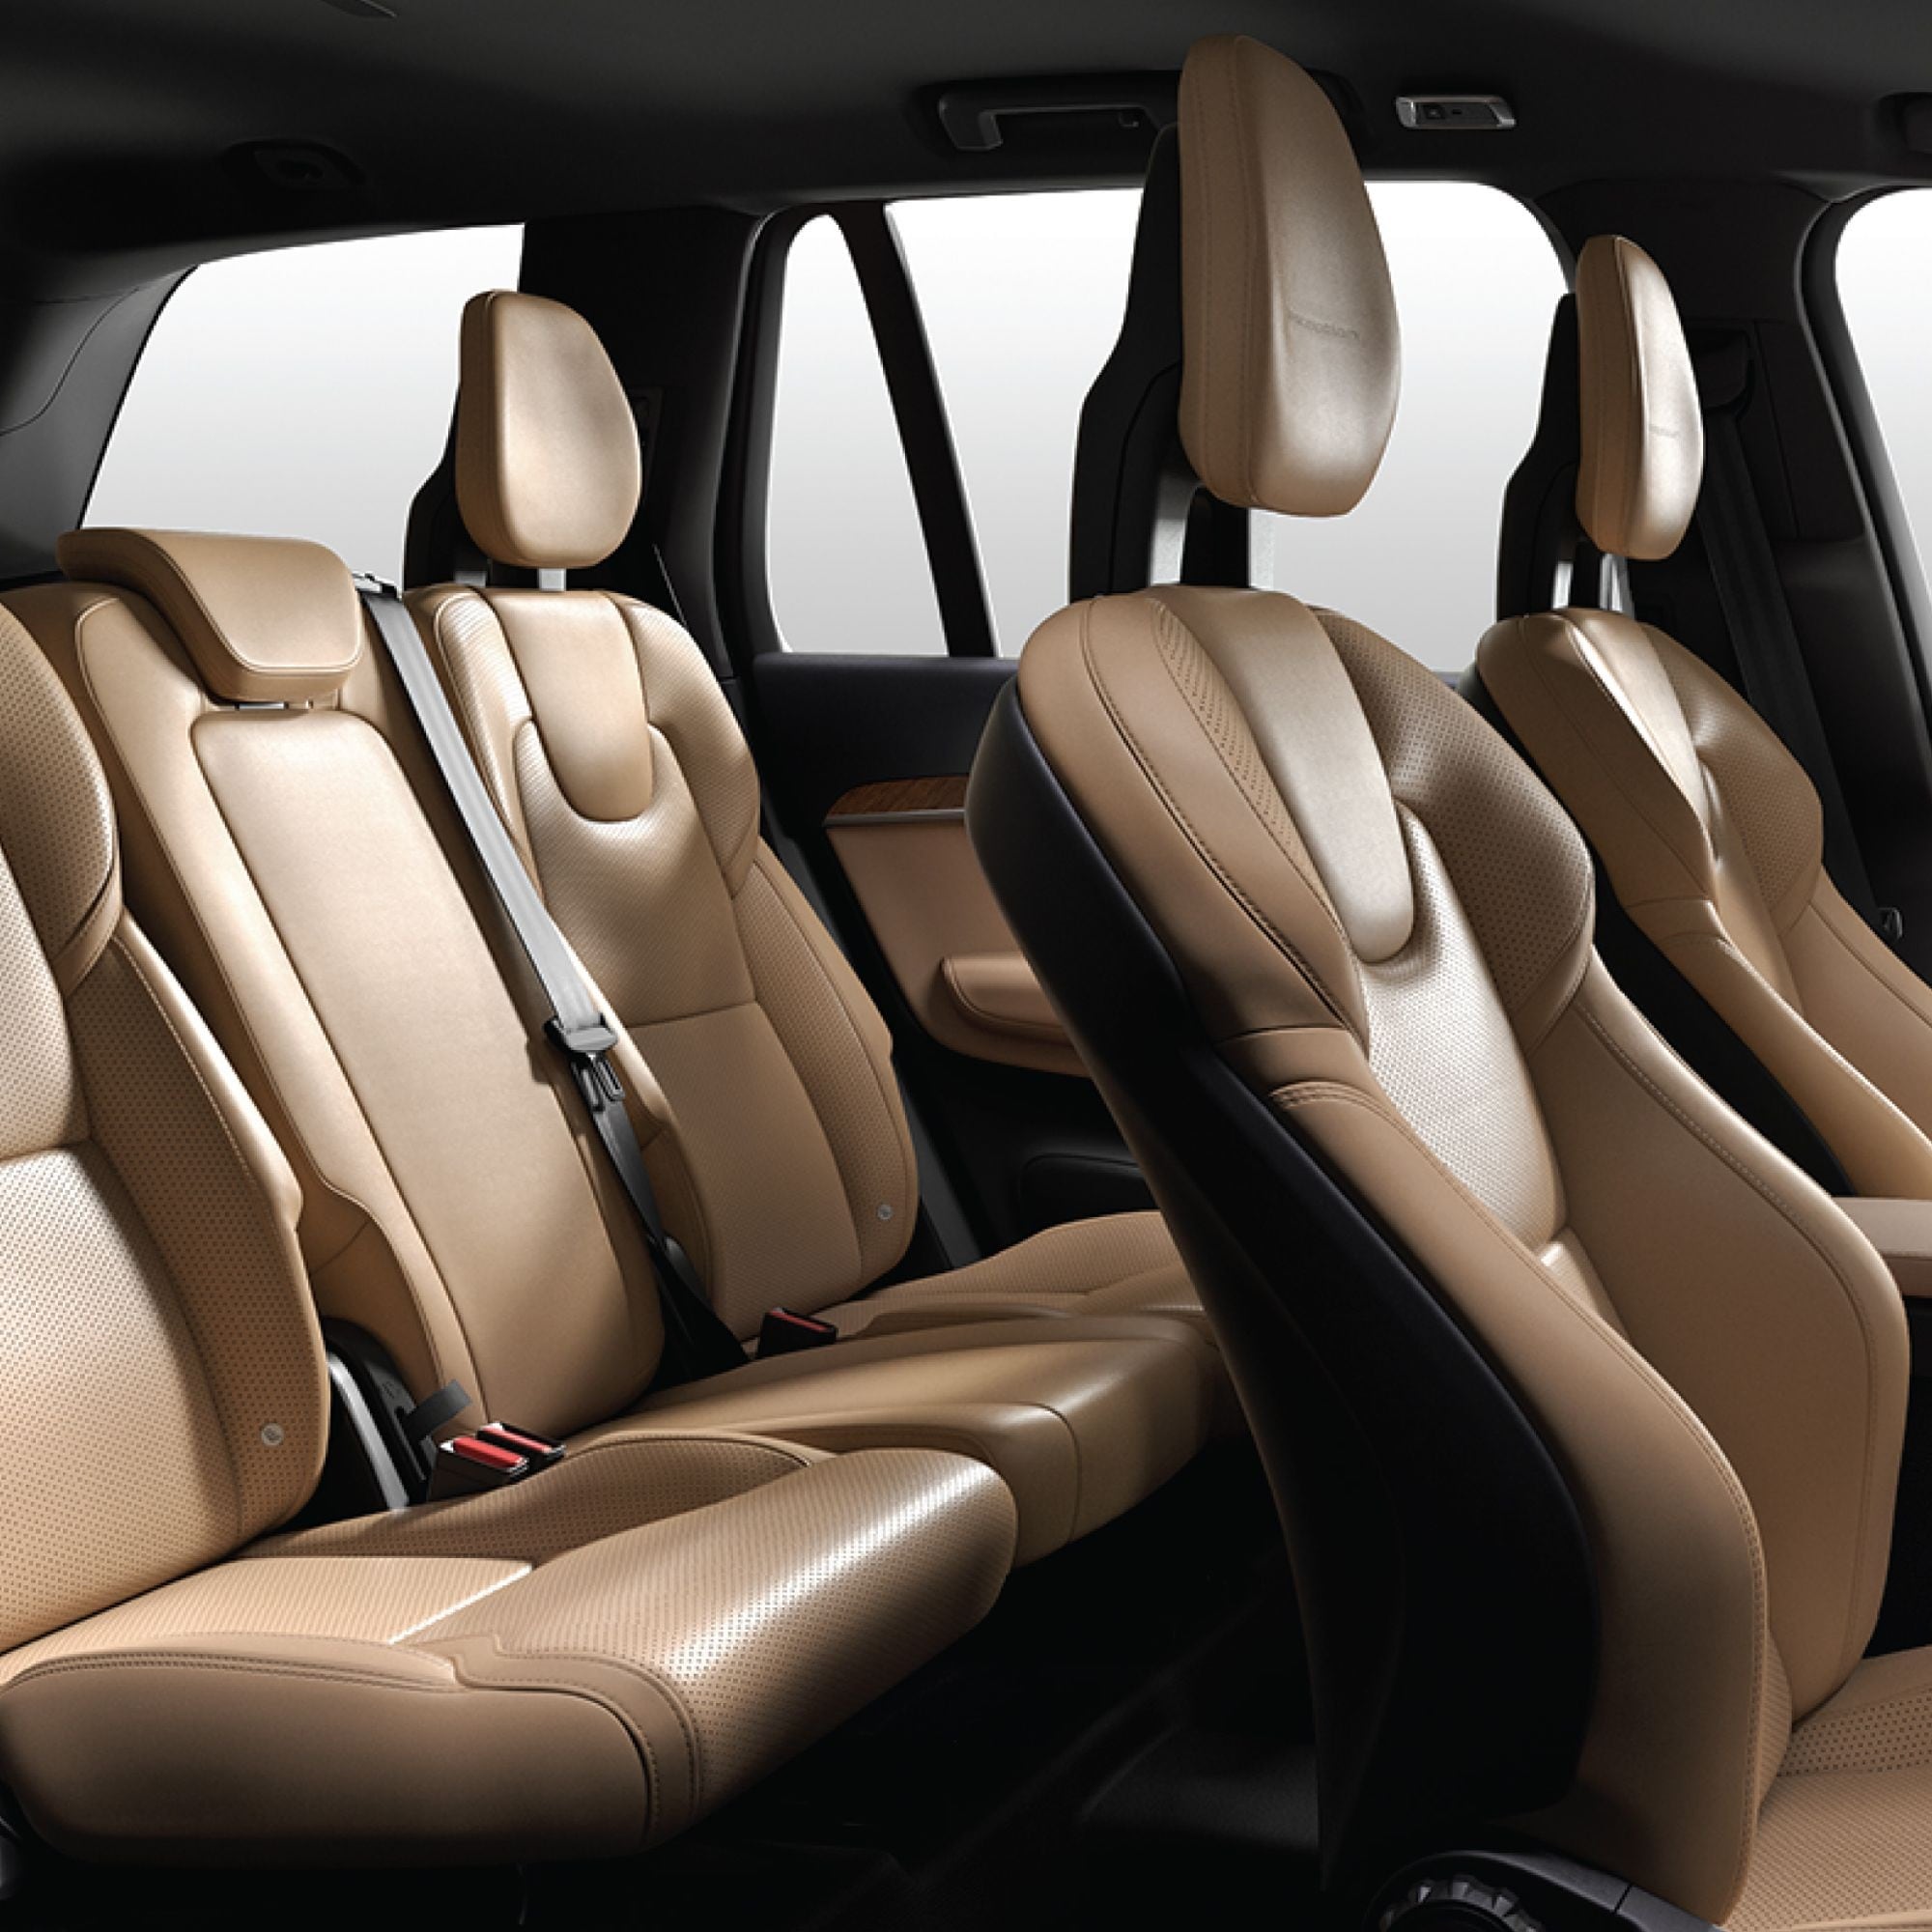 Interior close-up of a leather front seat in a Volvo XC60.